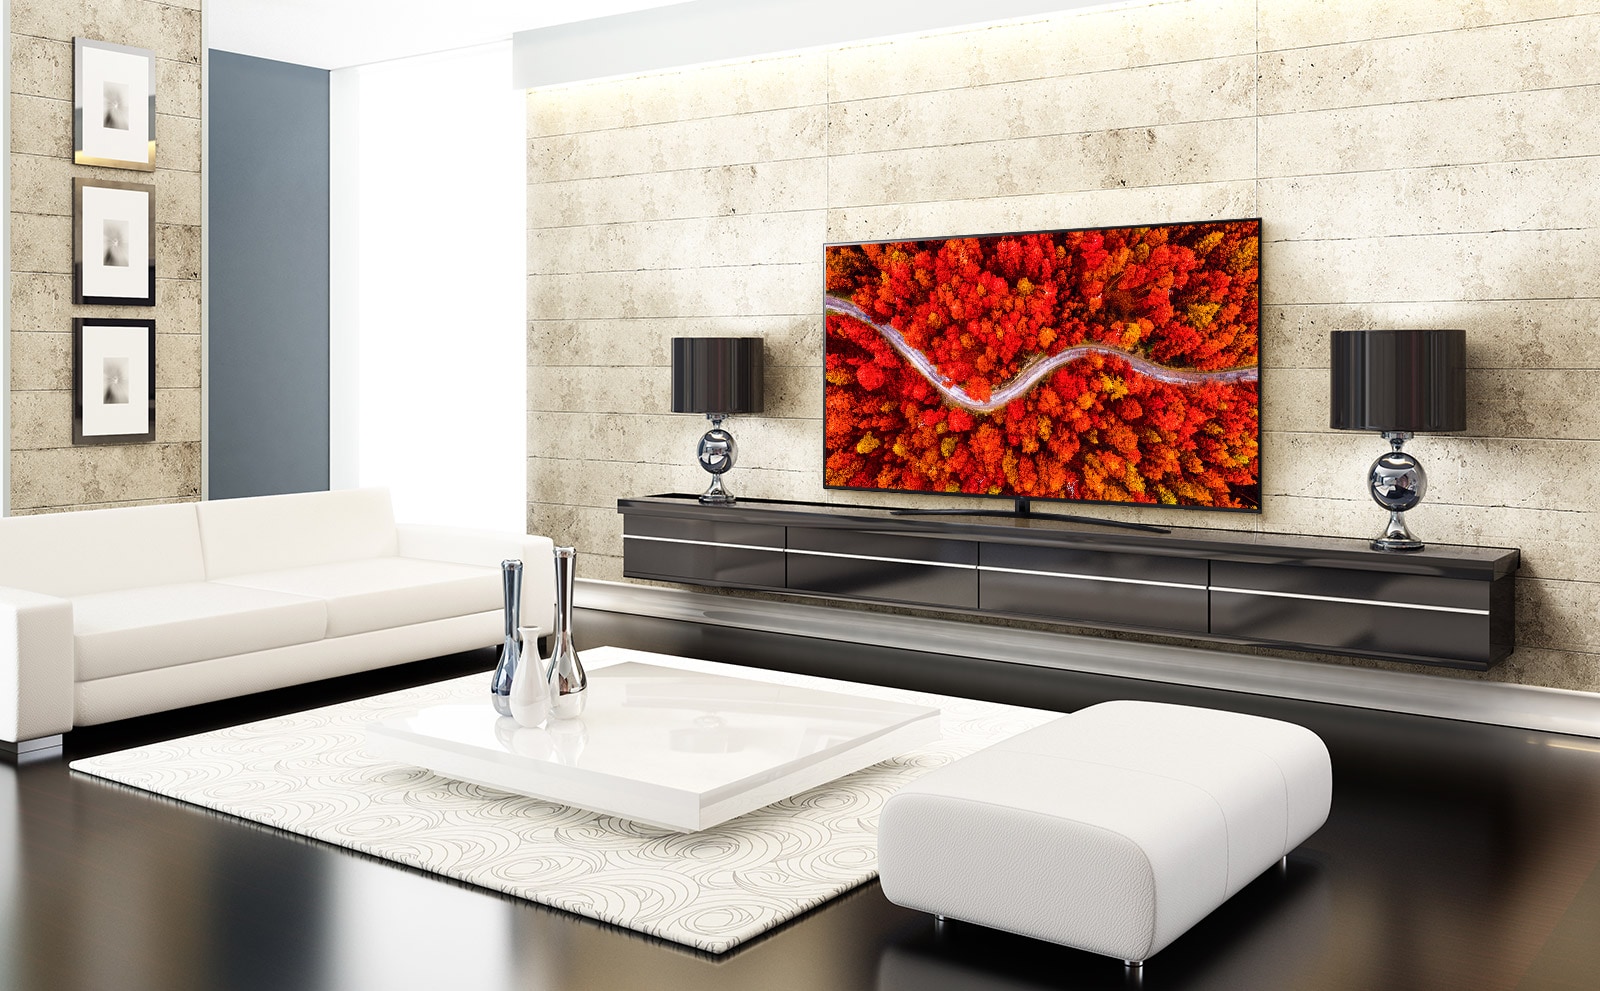 An elegant room with a television showing an aerial view of the woods in red.